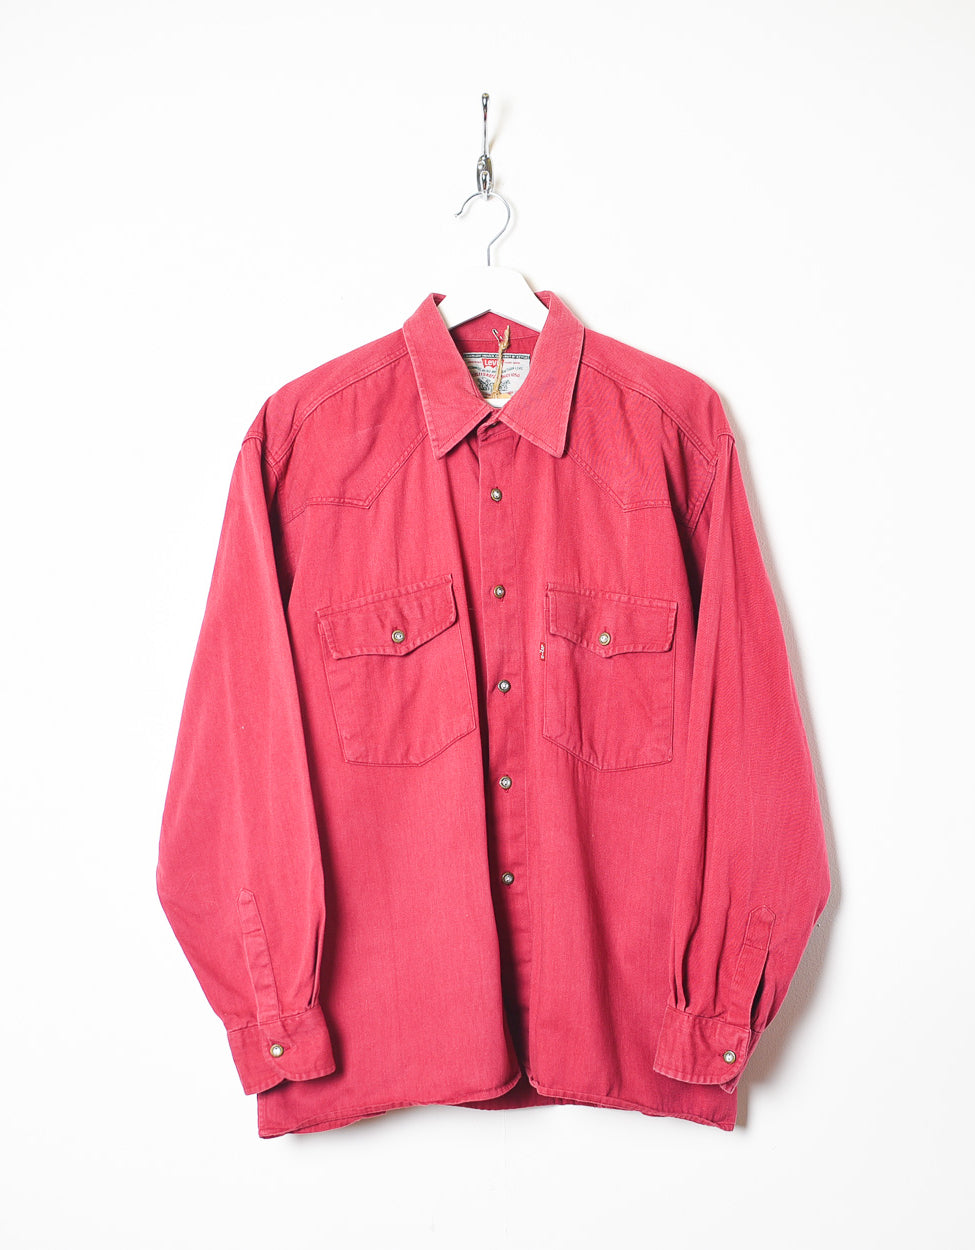 Red Levi's Shirt - X-Large